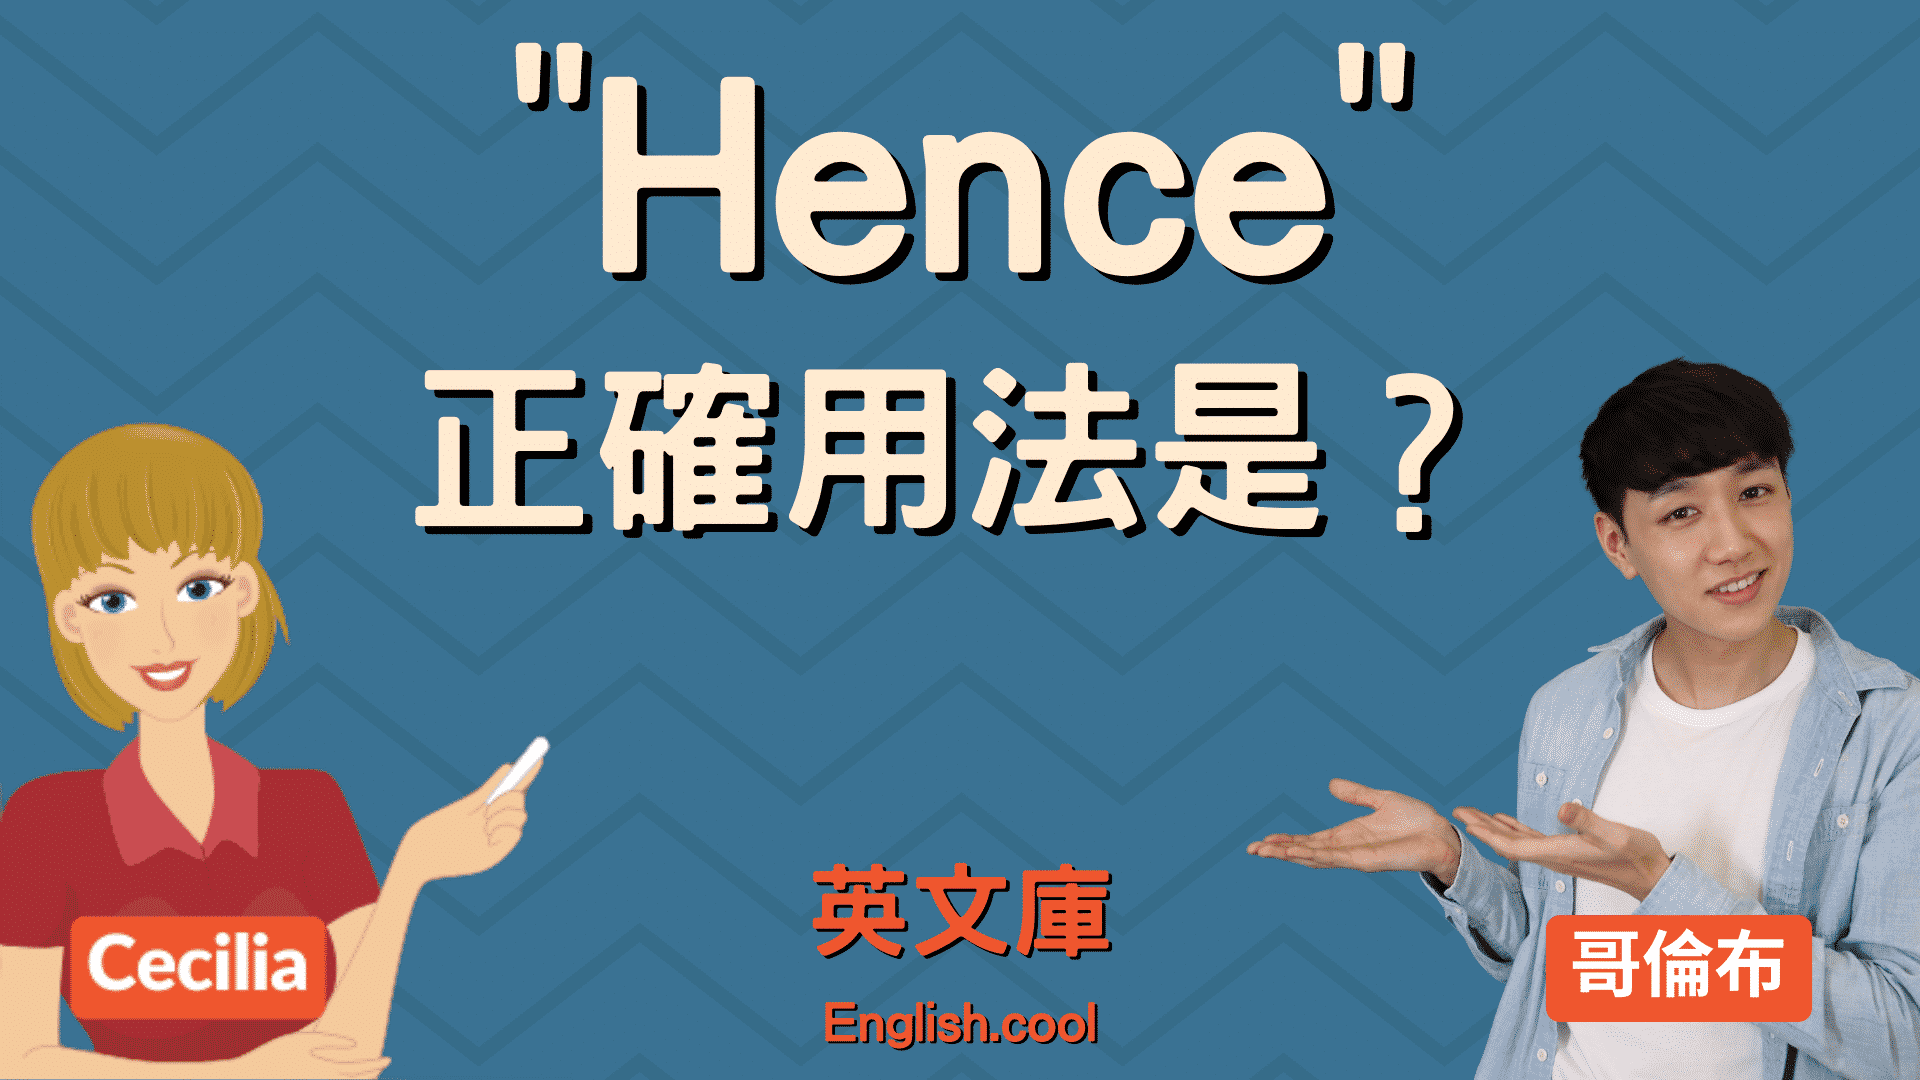 You are currently viewing 「hence」正確用法是？來看例句！